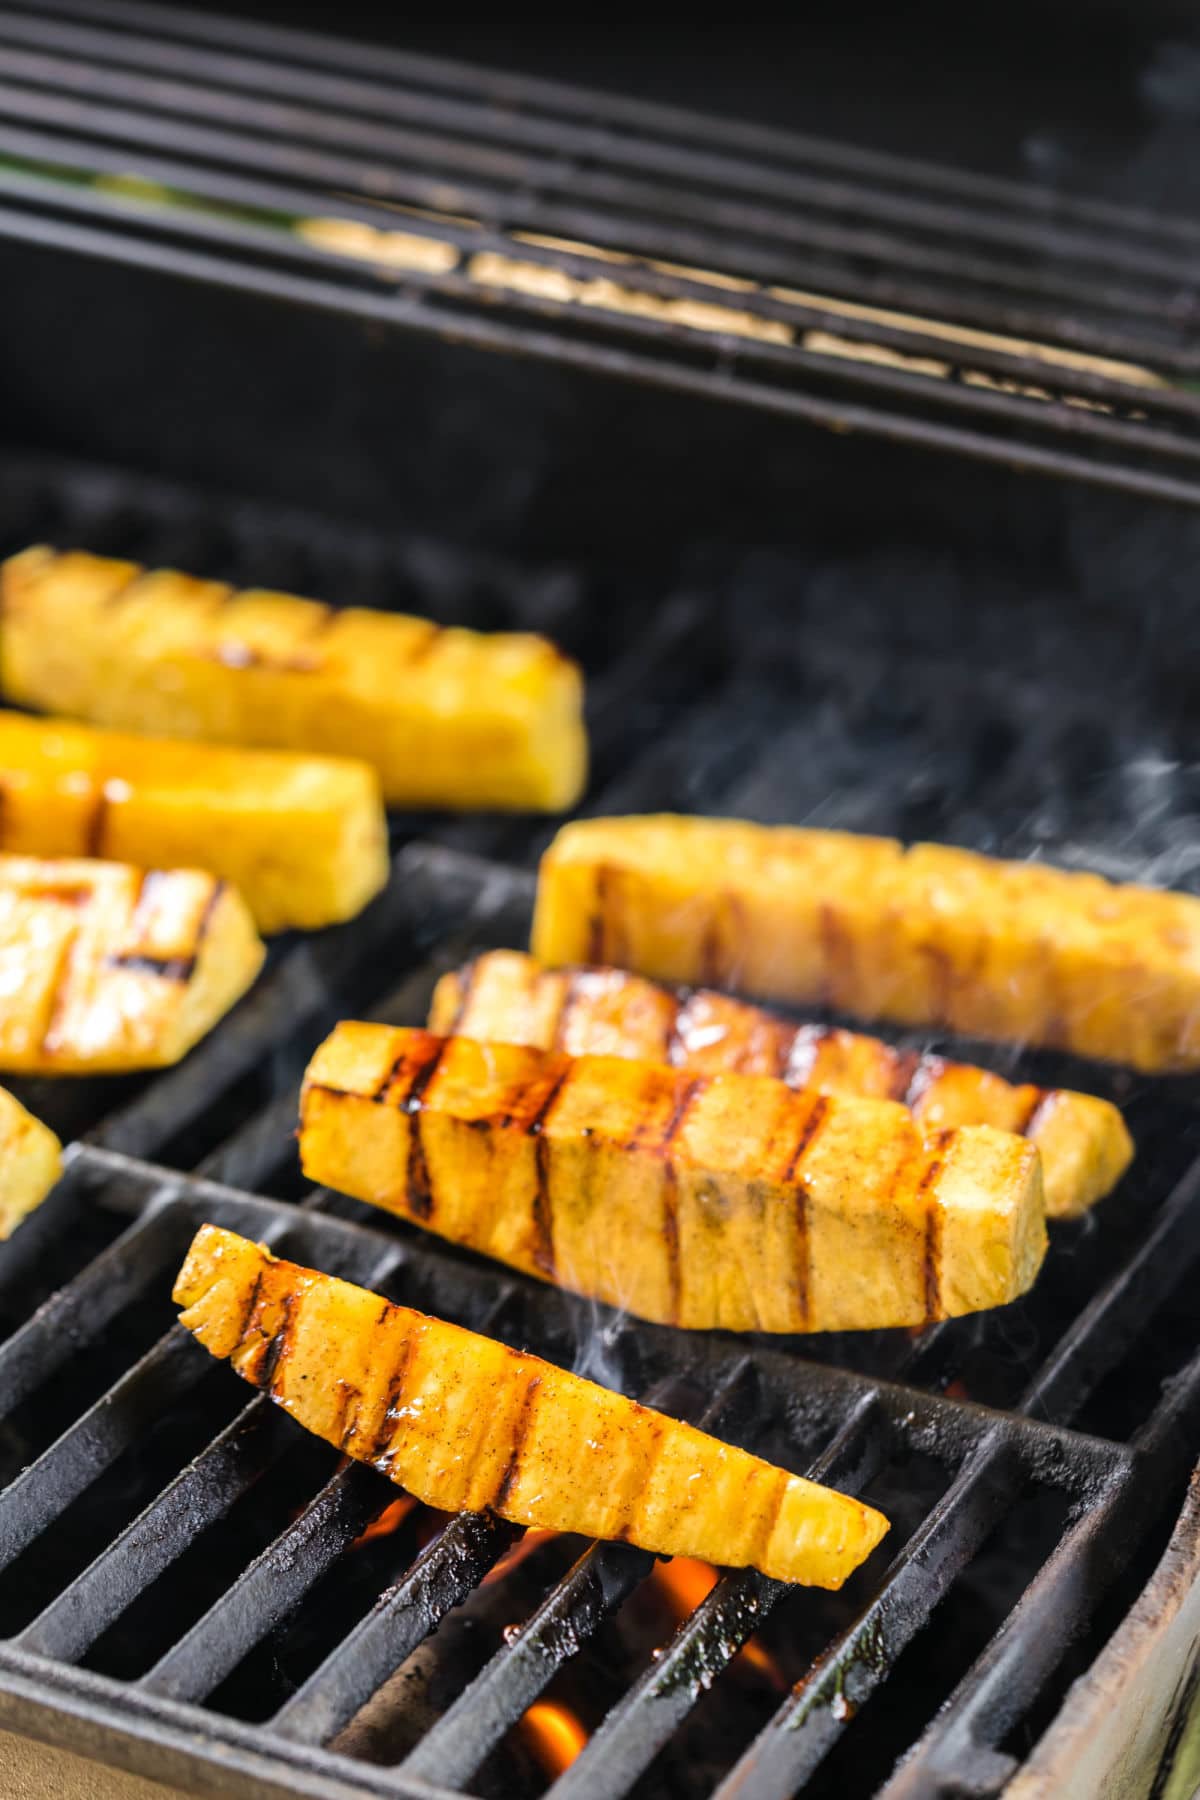 Pineapple on a hot grill.